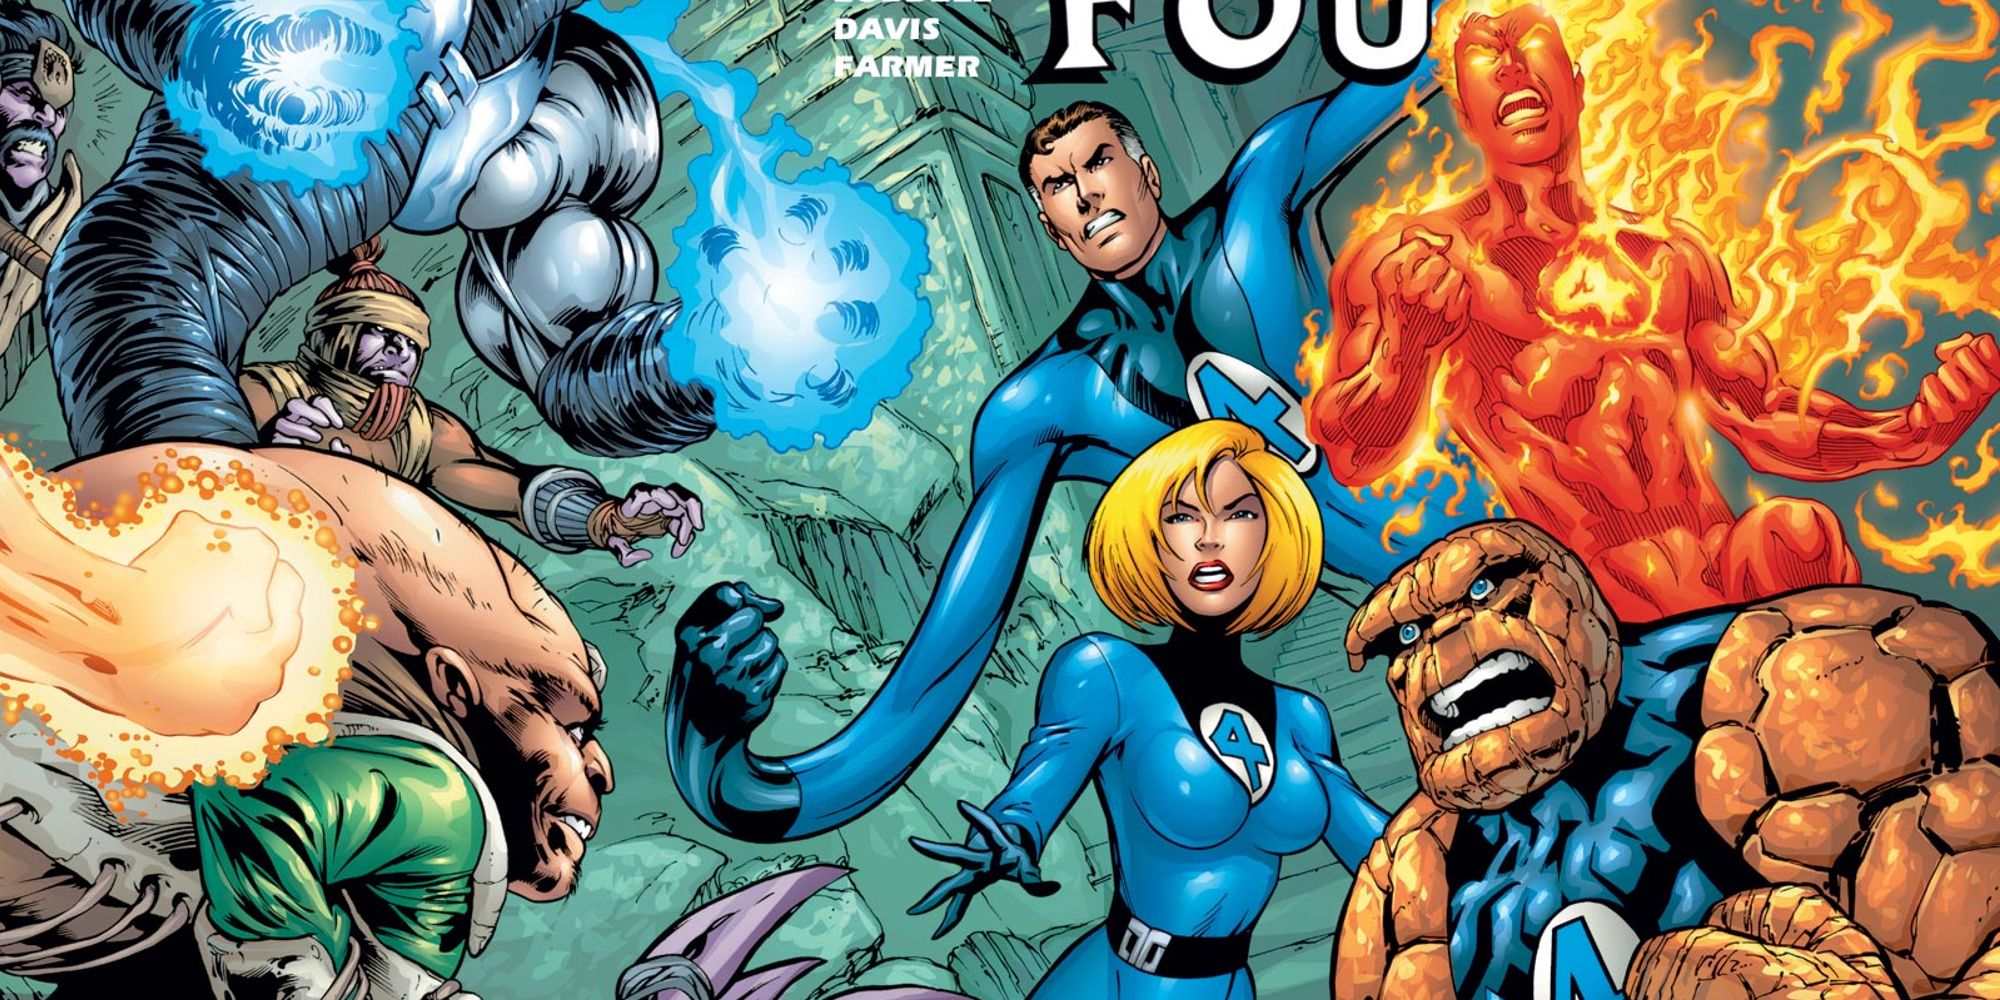 The Fantastic Four charging into battle in Fantastic Four #1 (1998)